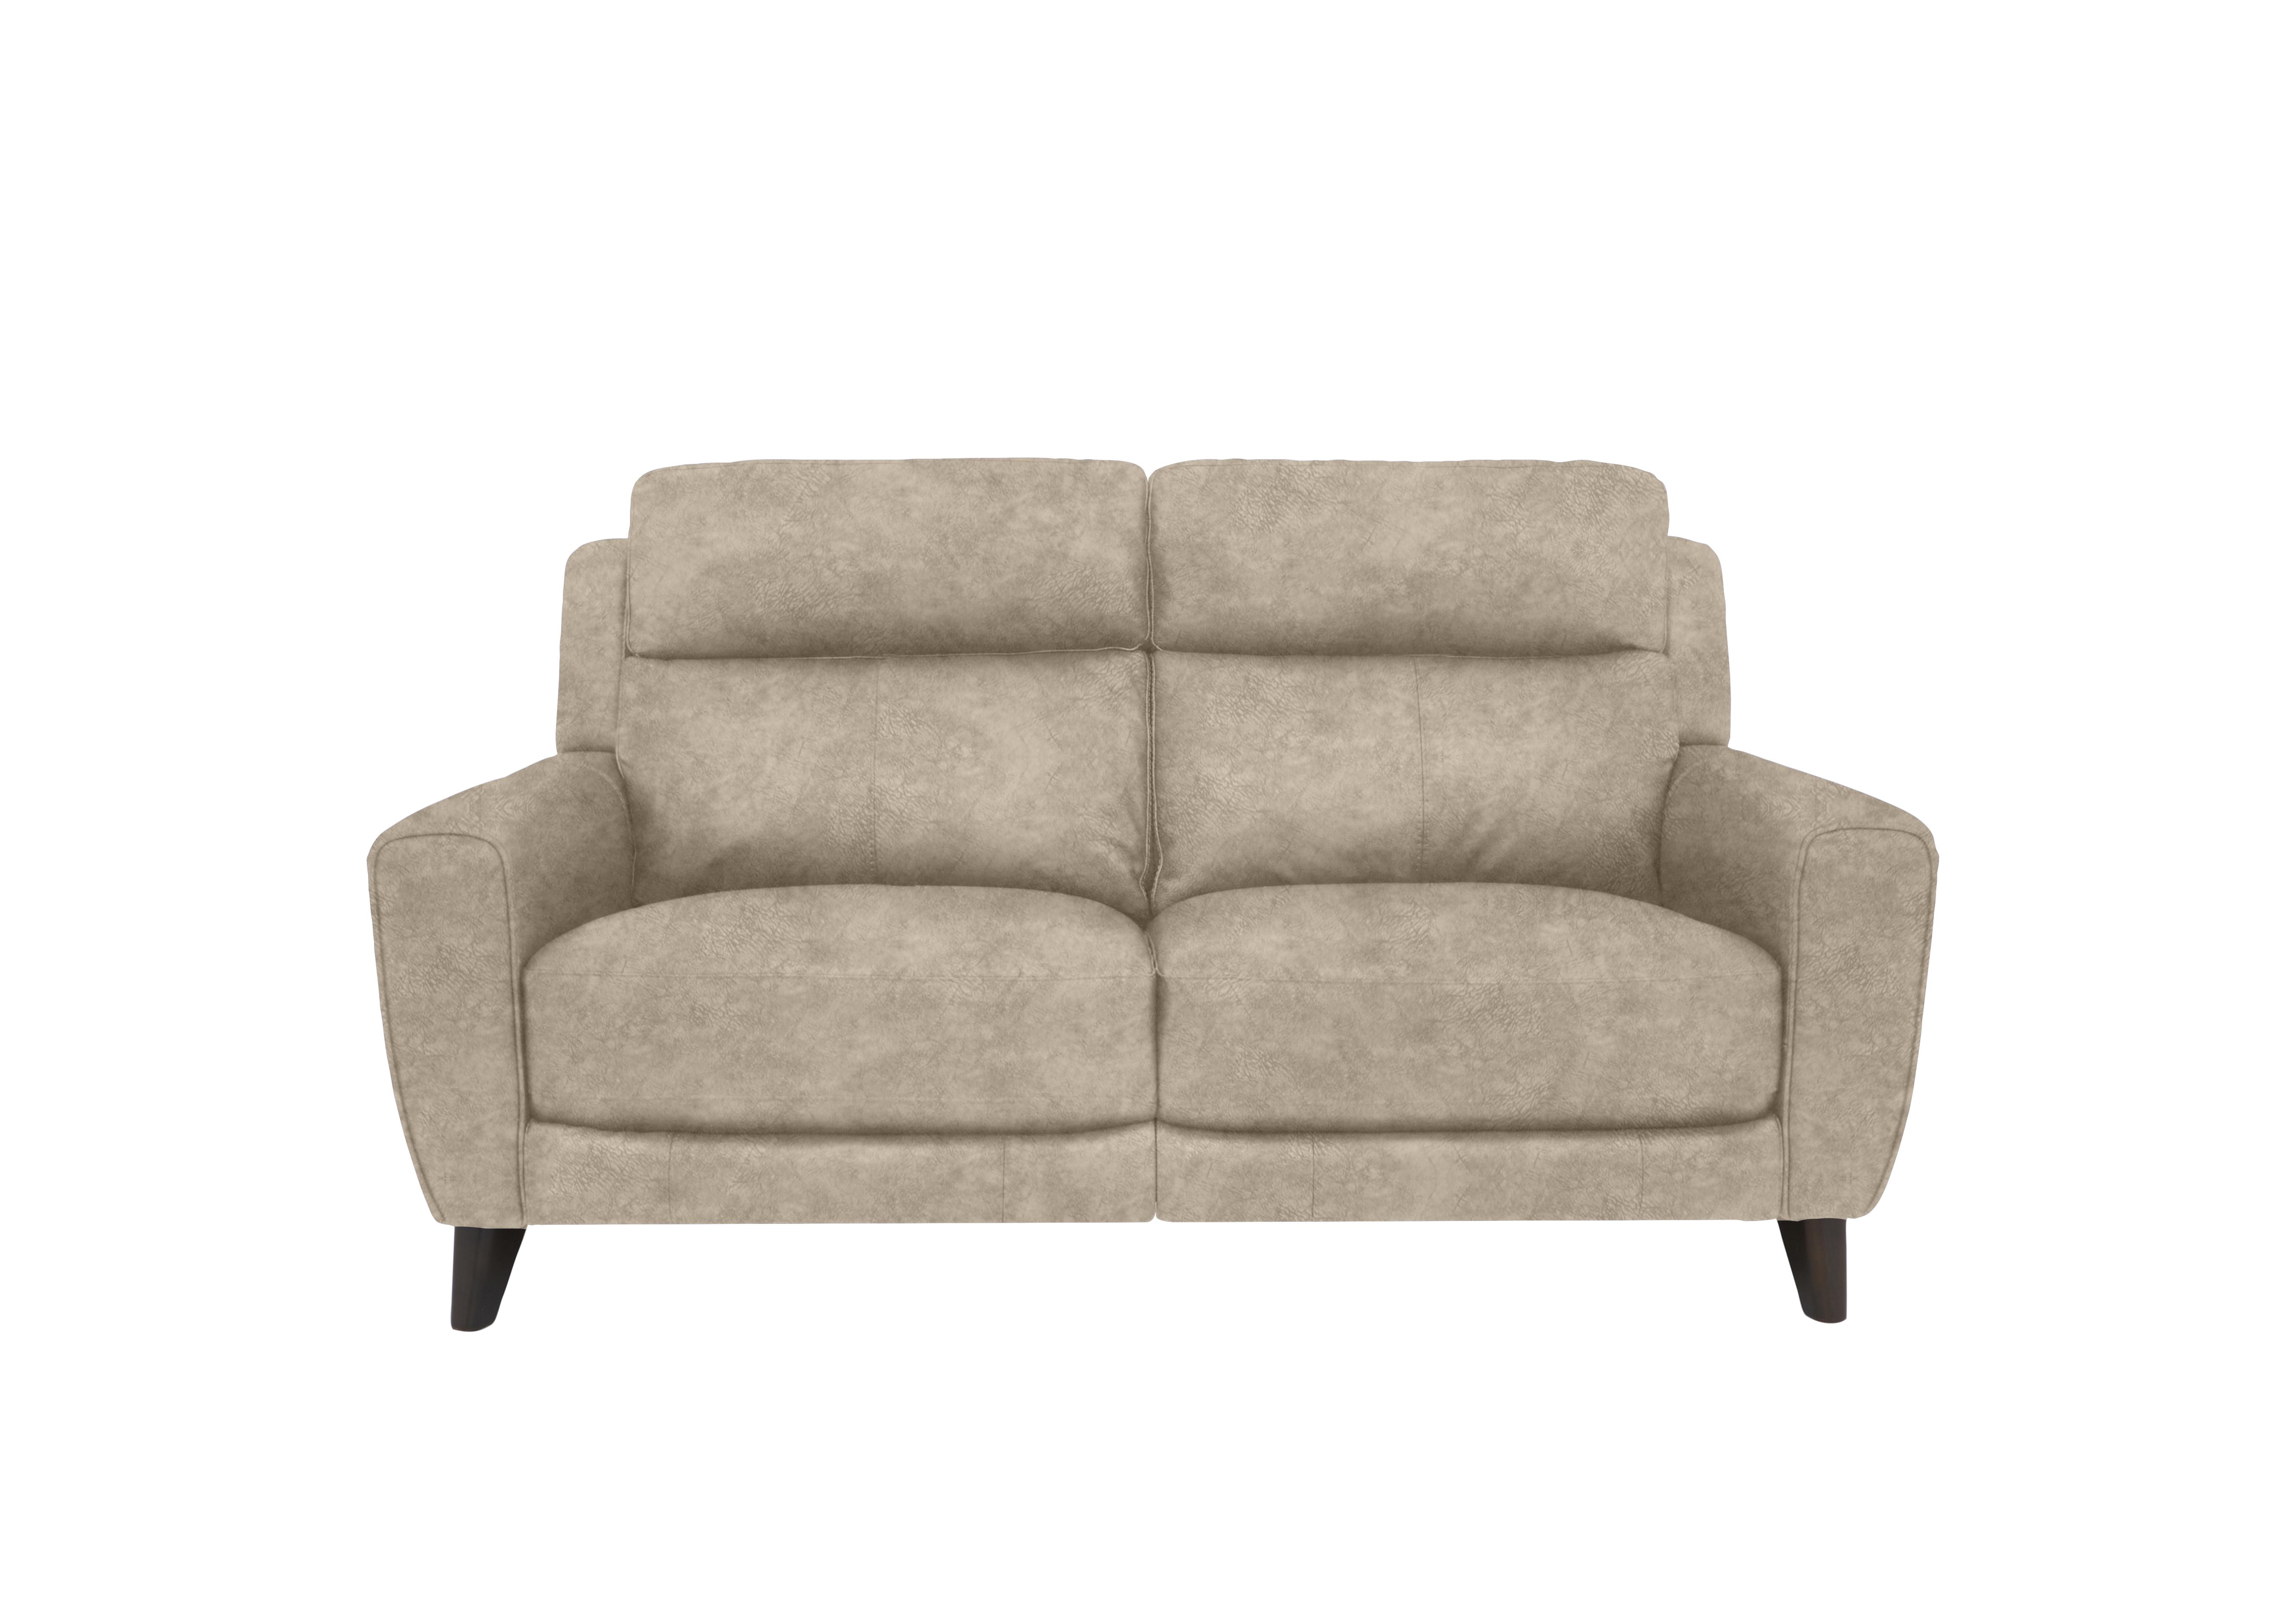 Zen 2 Seater Fabric Power Recliner Sofa with Power Headrests and Power Lumbar in Bfa-Bnn-R26 Cream on Furniture Village